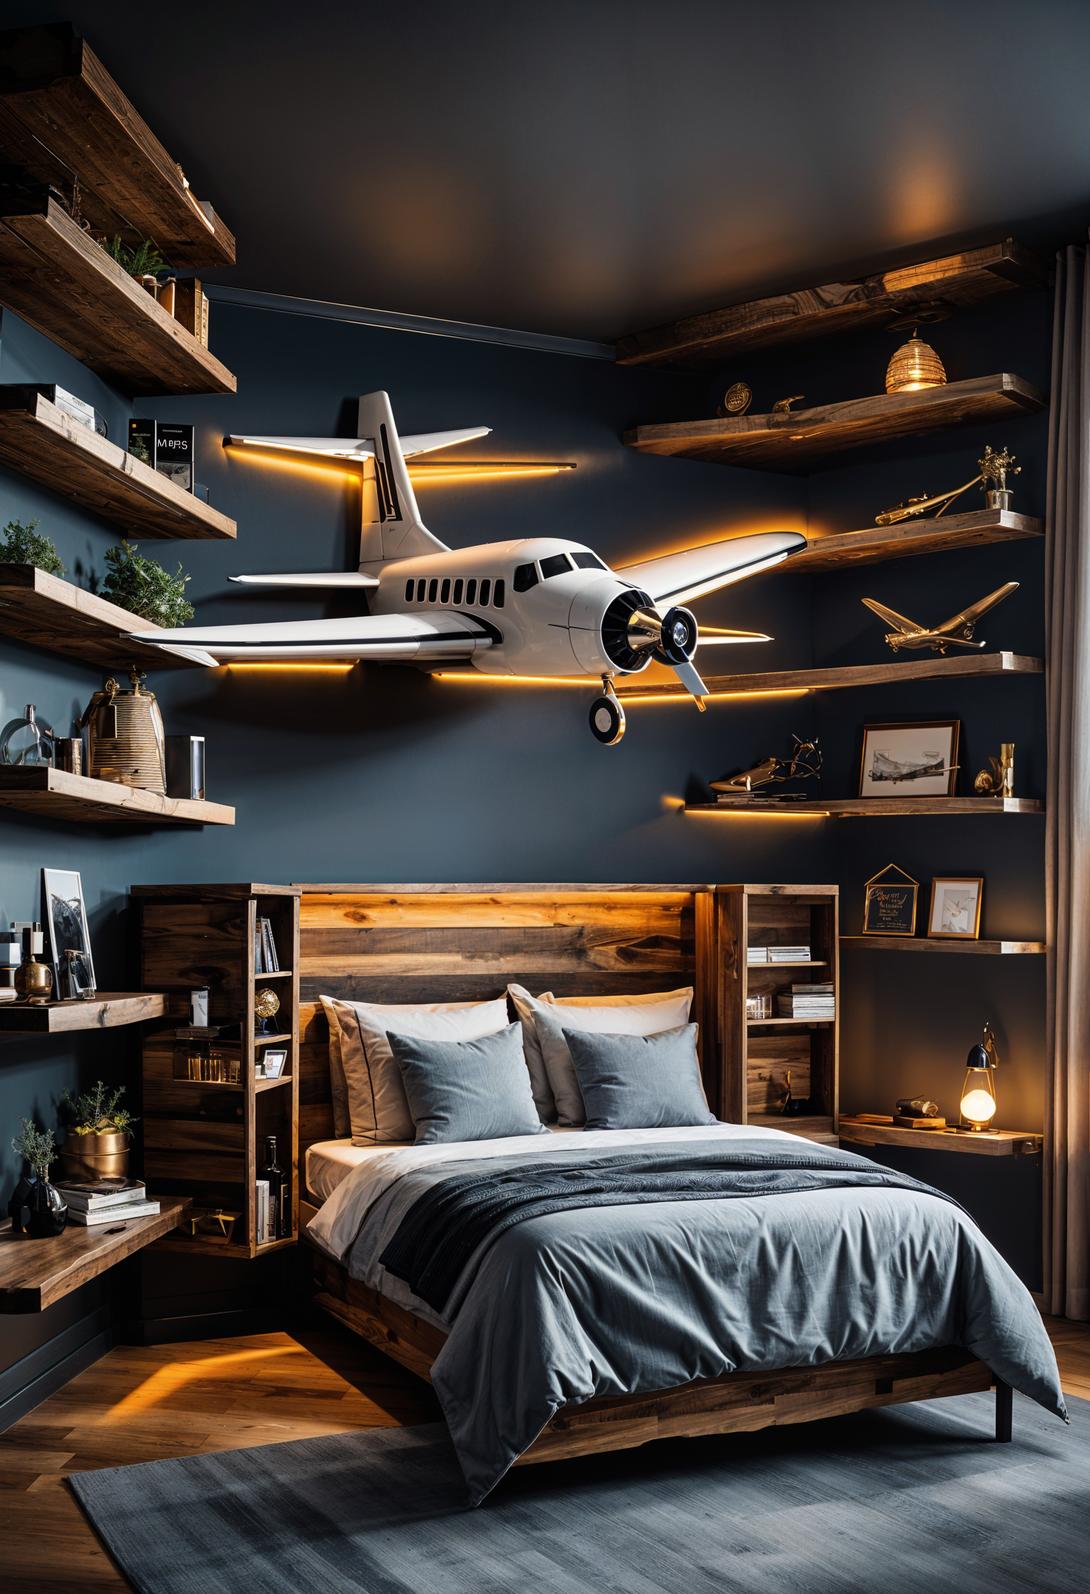 23. Airplane Wing Shelving Ideas-1